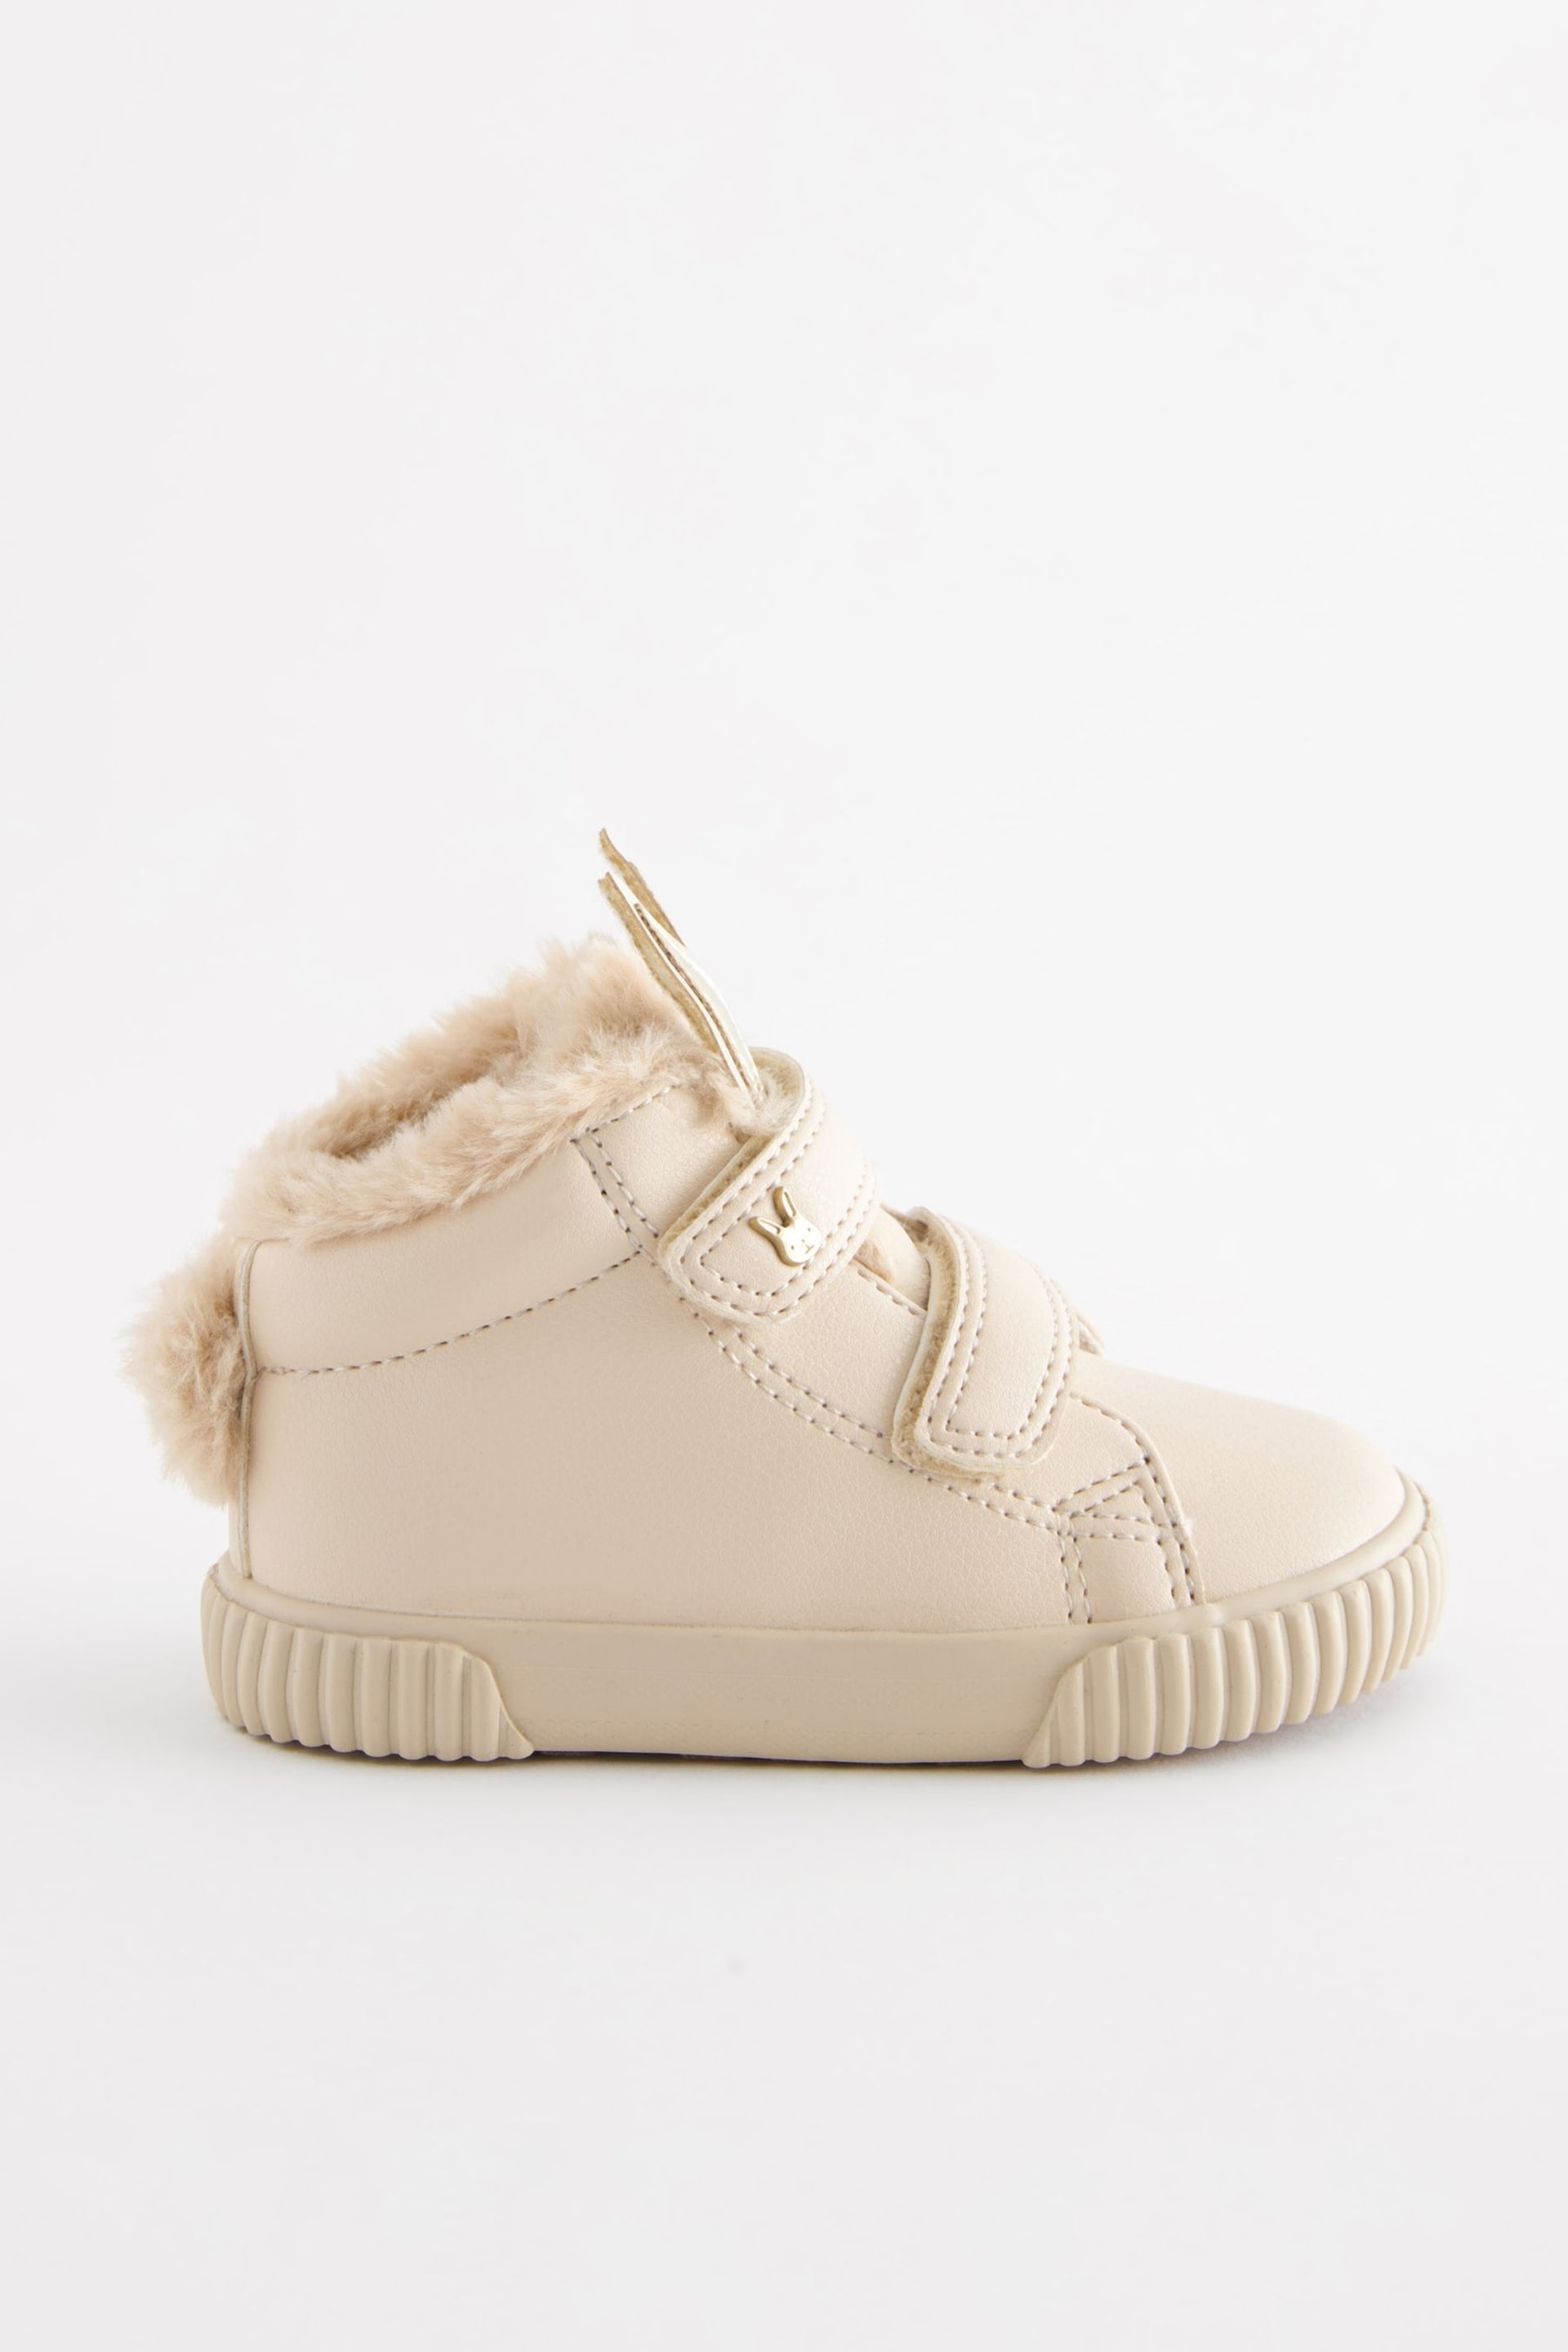 Bone White Bunny Wide Fit (G) High Top Trainers - Image 2 of 5